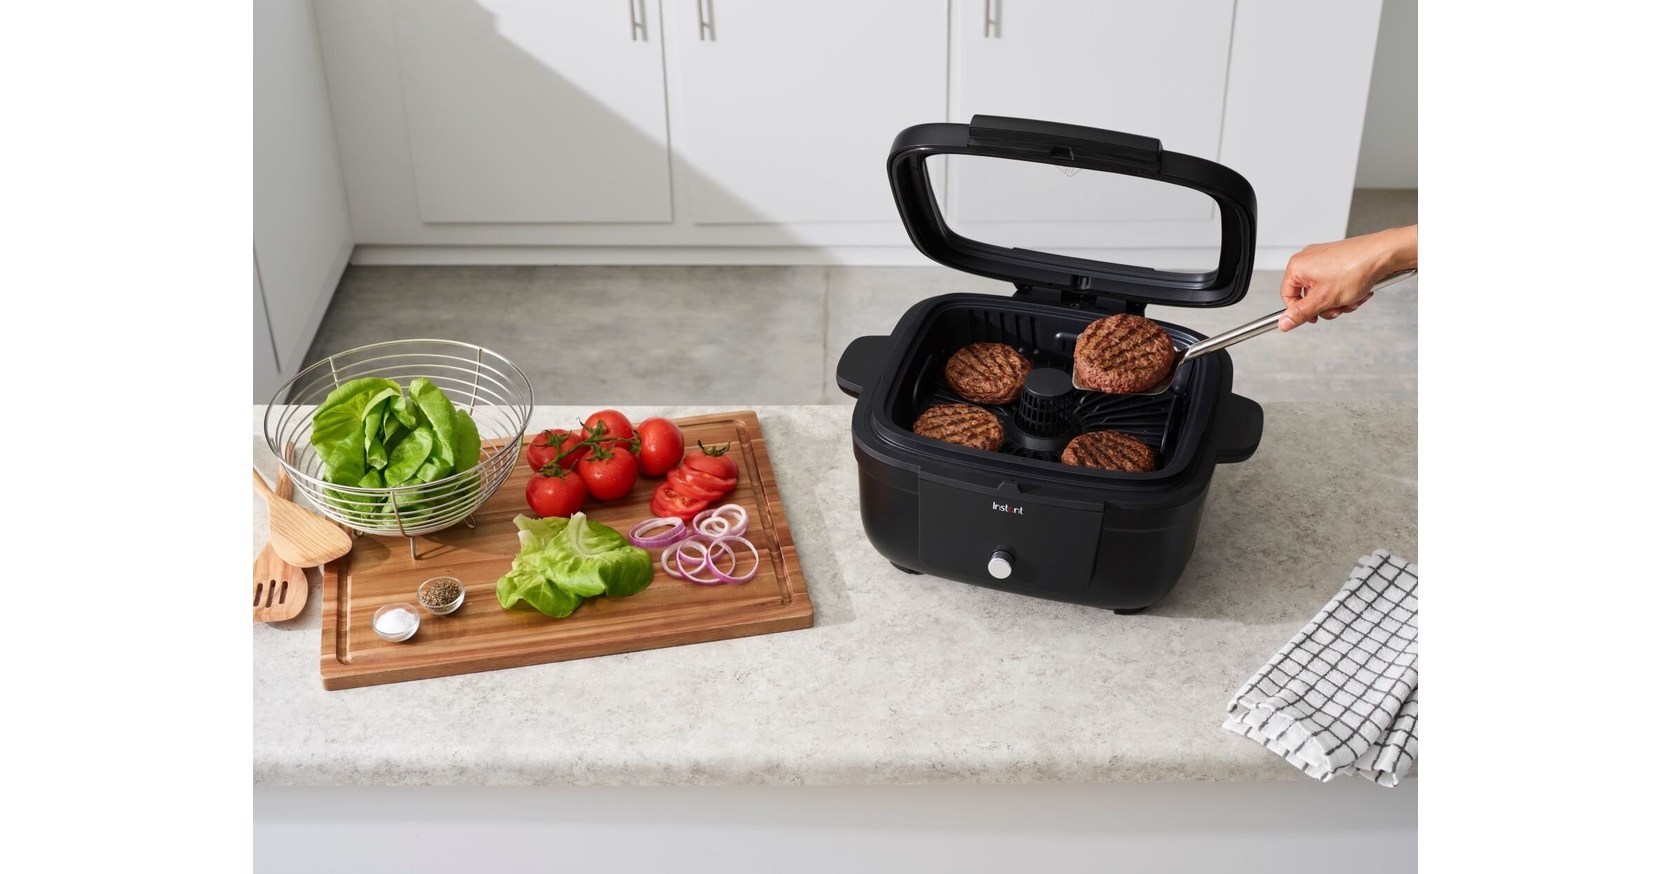 https://mma.prnewswire.com/media/1921041/Instant_Brands___The_Instant_Indoor_Grill_and_Air_Fryer.jpg?p=facebook